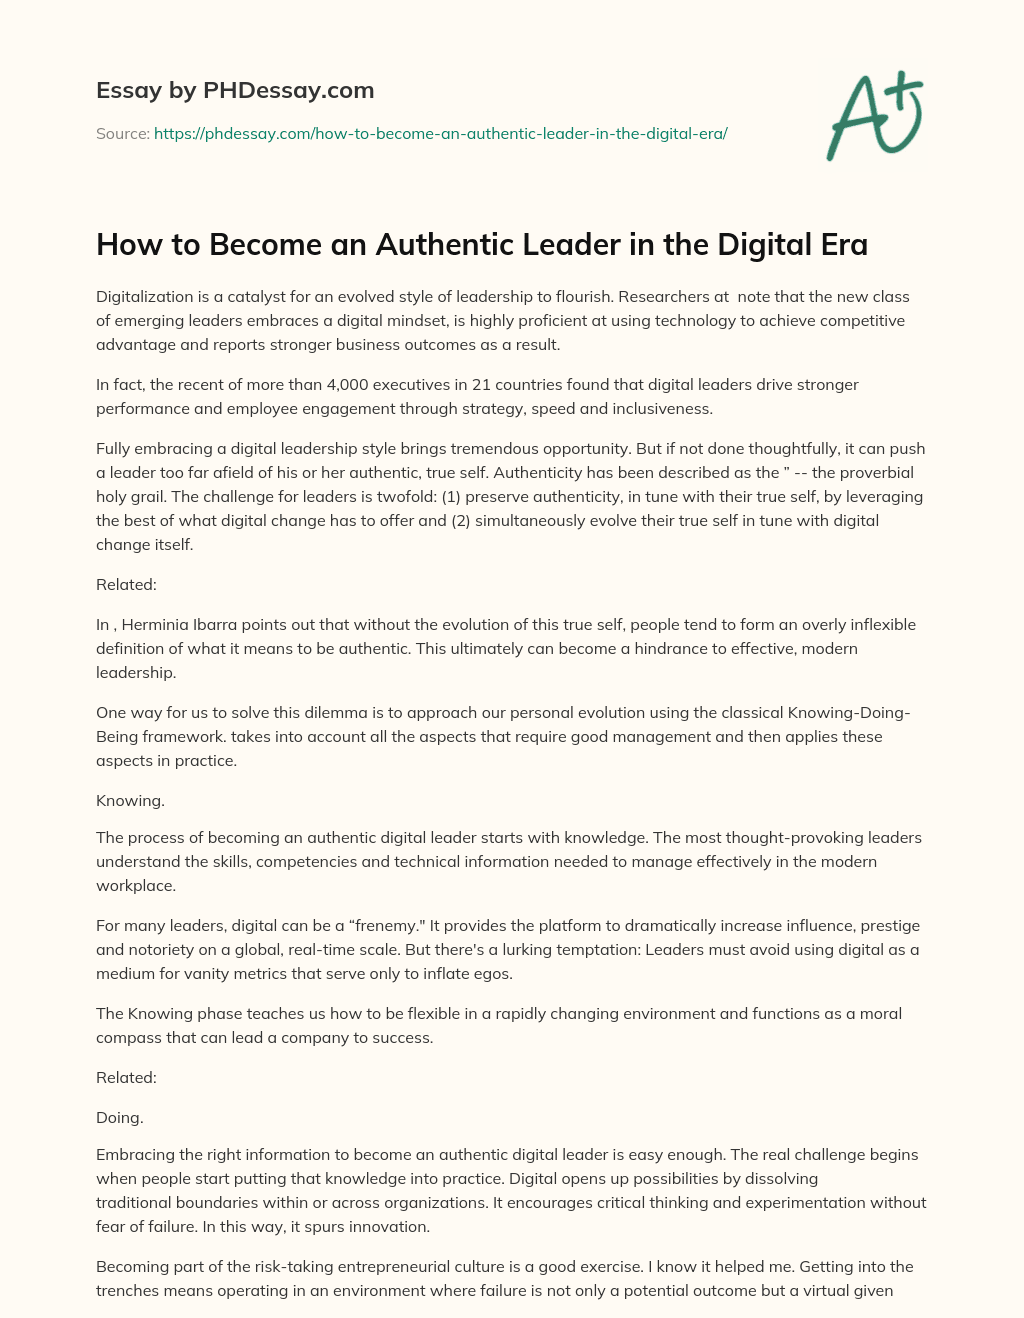 How to Become an Authentic Leader in the Digital Era essay